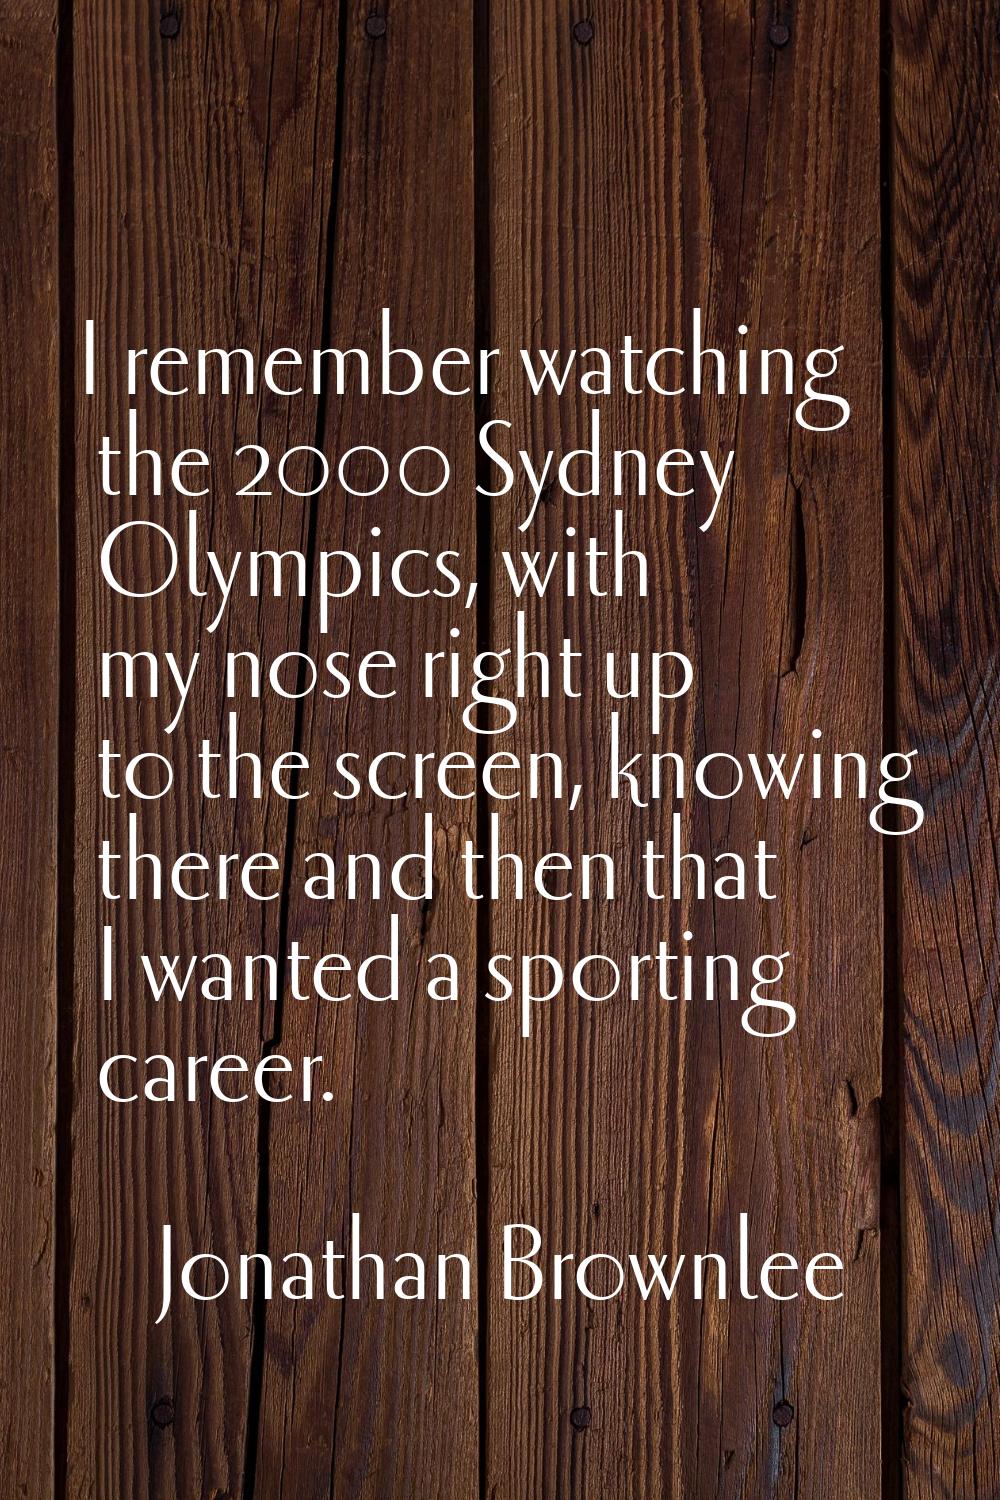 I remember watching the 2000 Sydney Olympics, with my nose right up to the screen, knowing there an